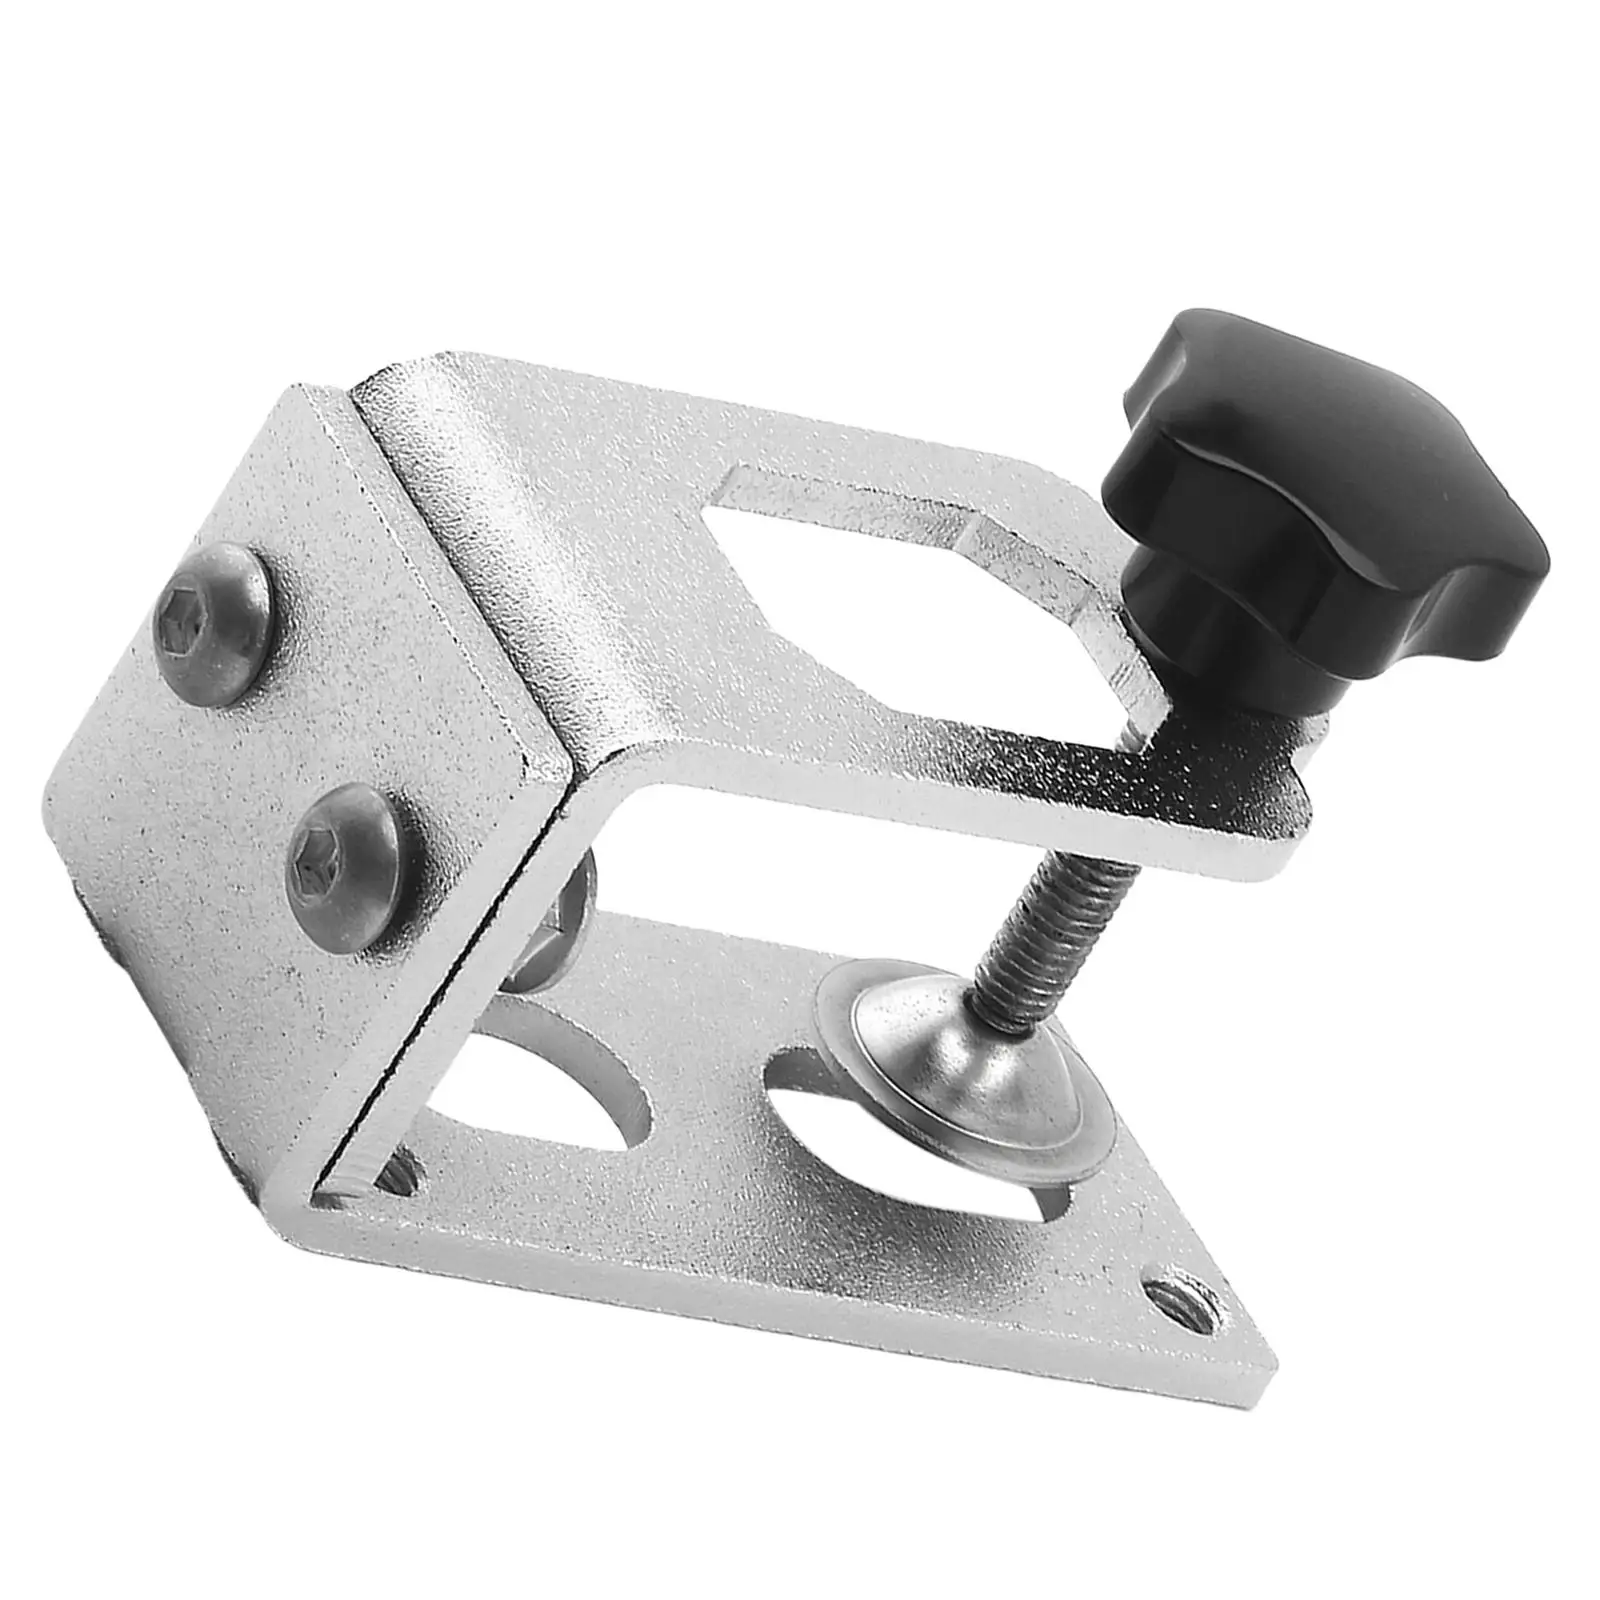 Handbrake Clamp Replacement Parts Bracket Accessories universal professionals Durable Table Bench for Truck Racing Games